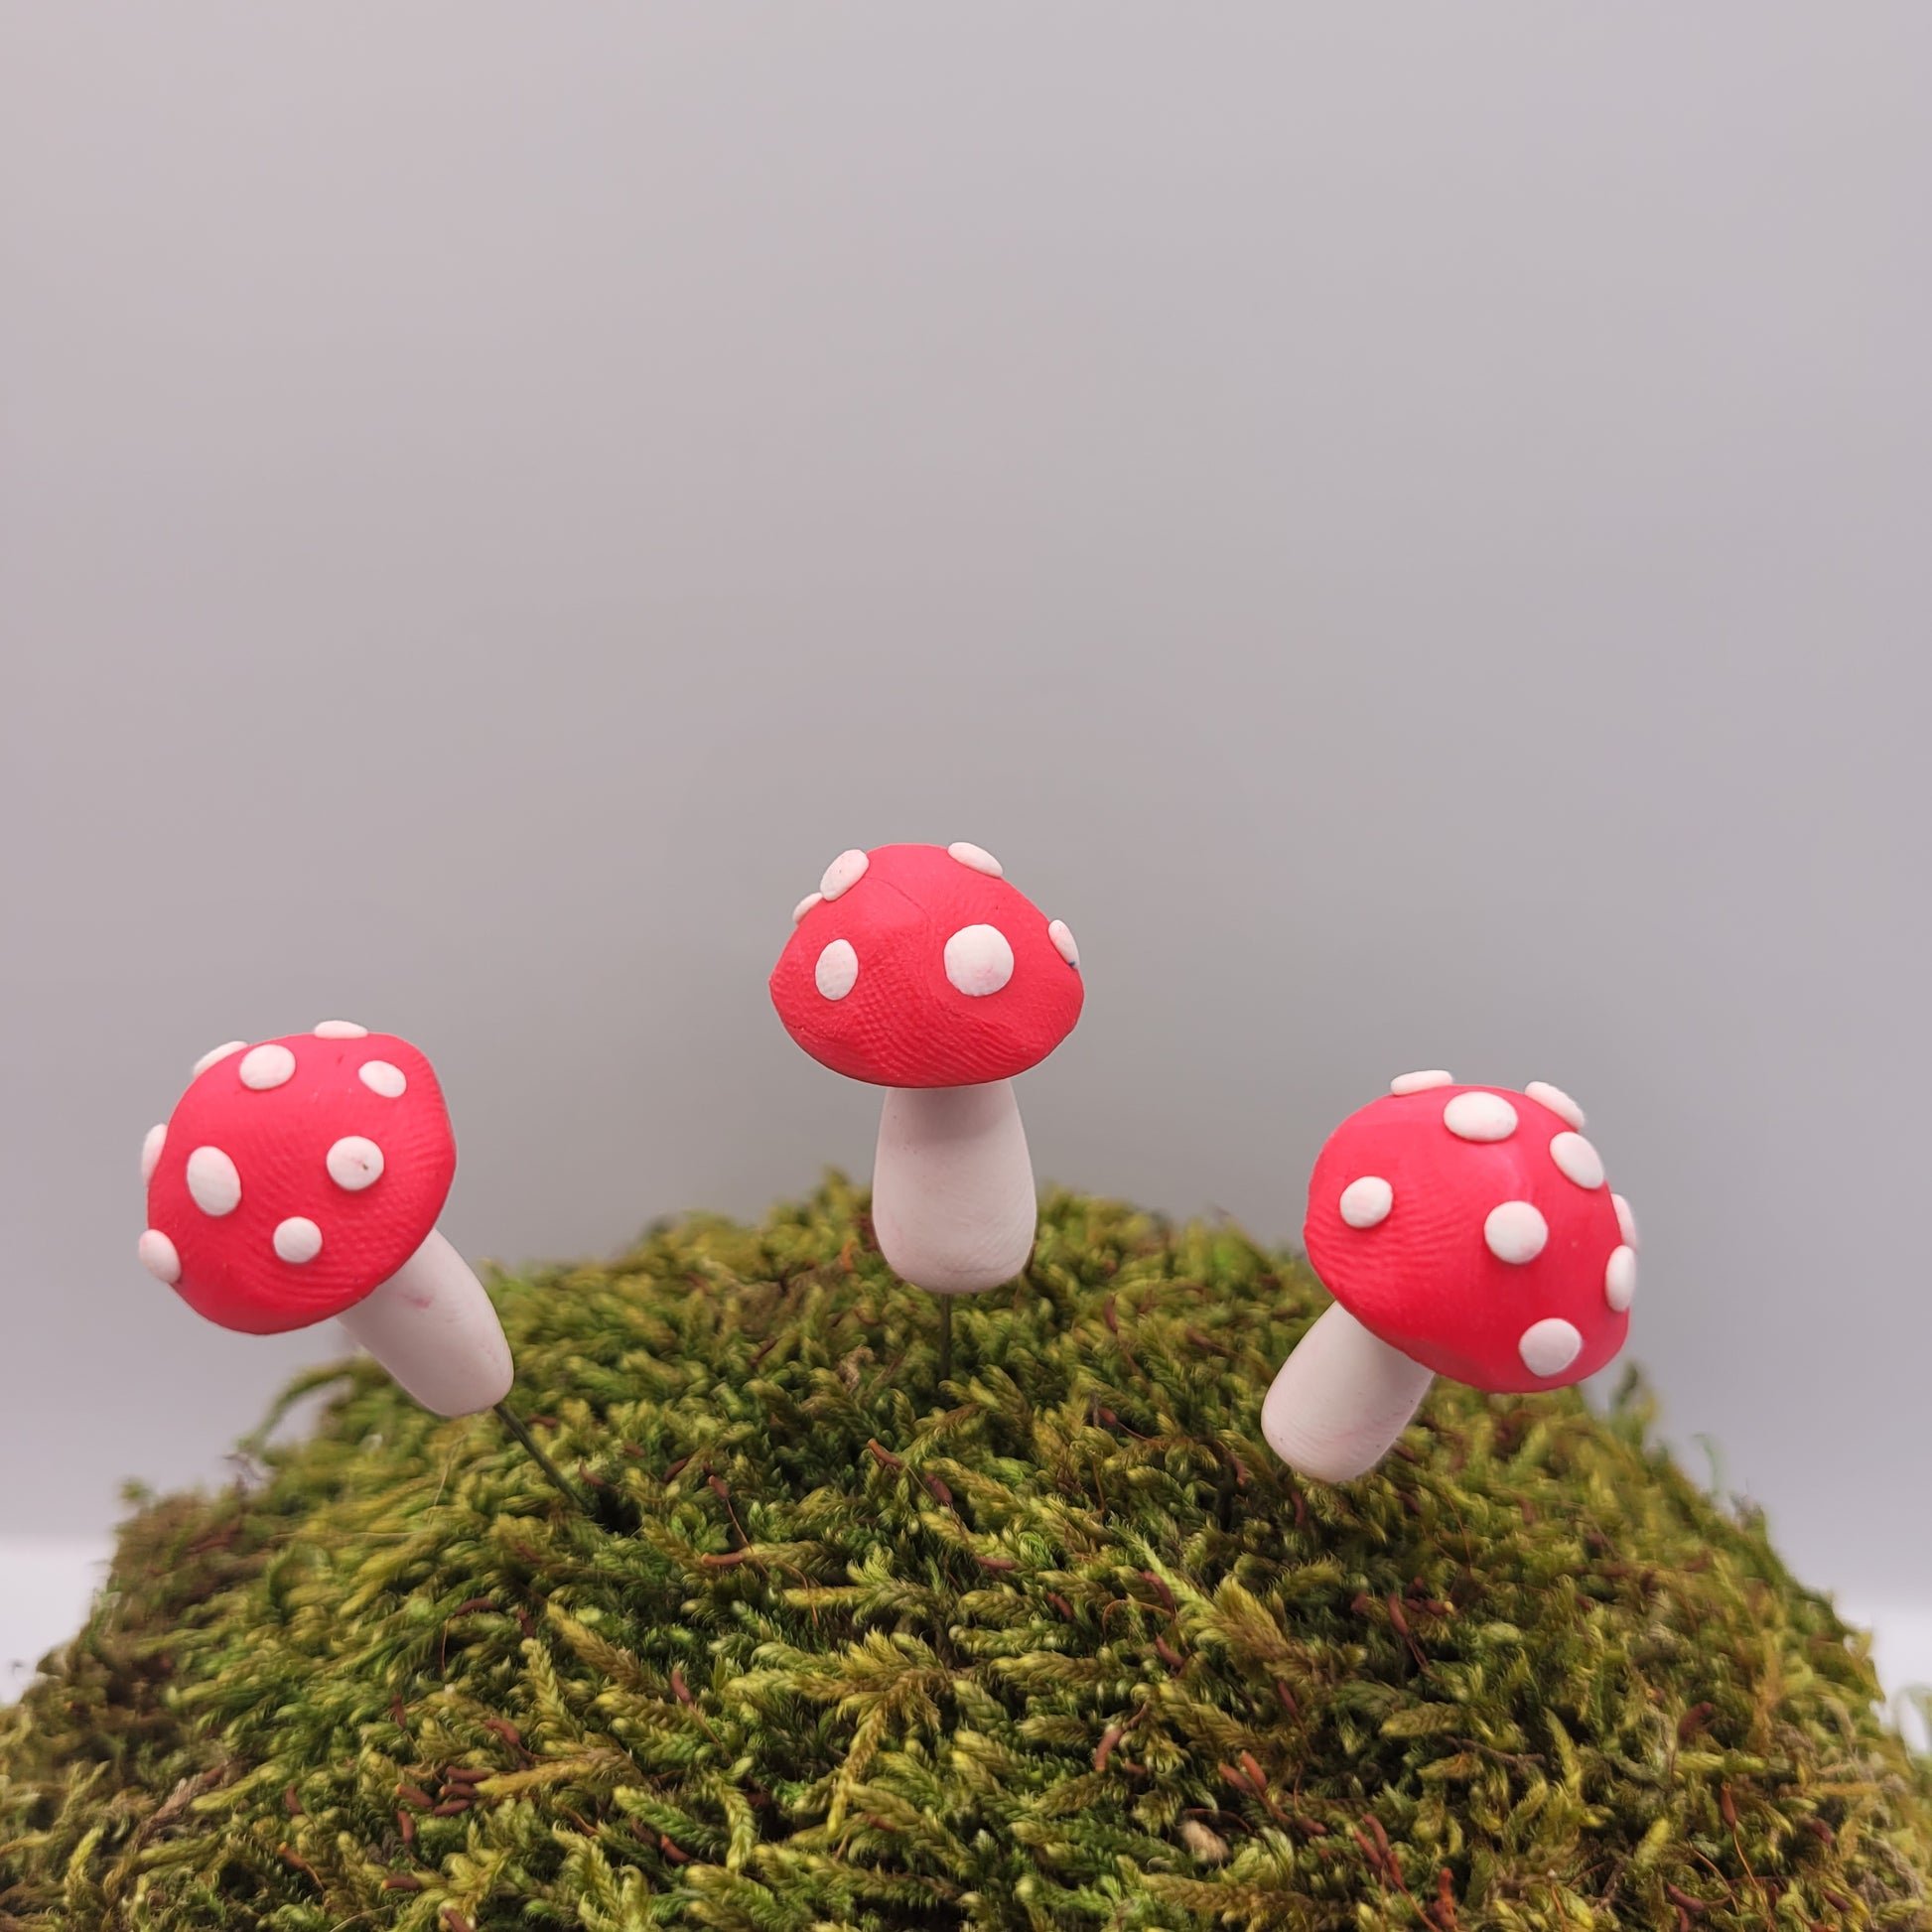 Three small pink mushrooms with textured tops stand on a preserved moss hill.